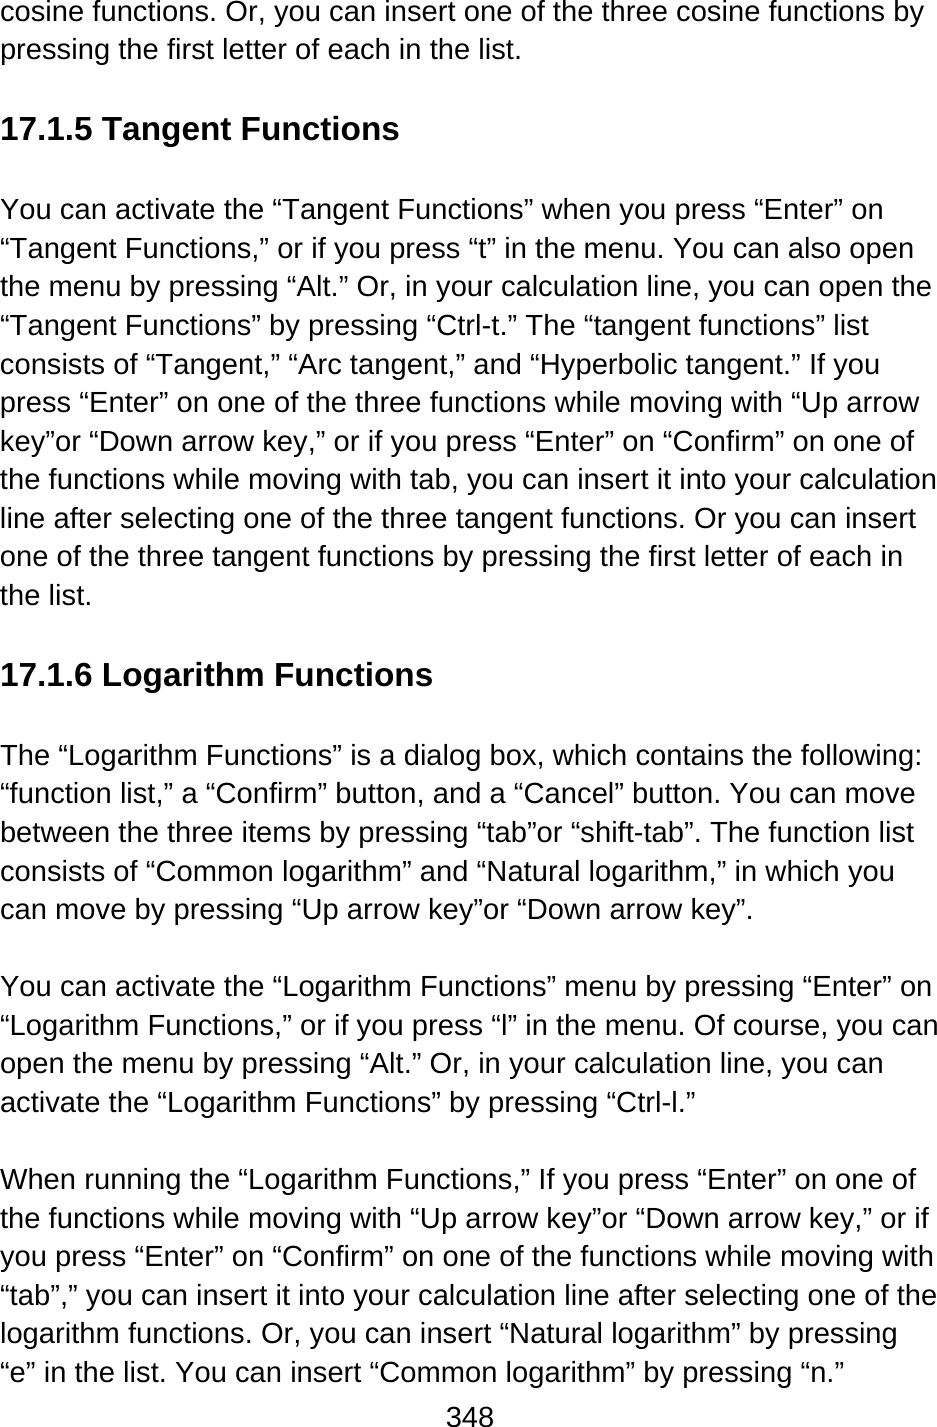 348  cosine functions. Or, you can insert one of the three cosine functions by pressing the first letter of each in the list.  17.1.5 Tangent Functions  You can activate the “Tangent Functions” when you press “Enter” on “Tangent Functions,” or if you press “t” in the menu. You can also open the menu by pressing “Alt.” Or, in your calculation line, you can open the “Tangent Functions” by pressing “Ctrl-t.” The “tangent functions” list consists of “Tangent,” “Arc tangent,” and “Hyperbolic tangent.” If you press “Enter” on one of the three functions while moving with “Up arrow key”or “Down arrow key,” or if you press “Enter” on “Confirm” on one of the functions while moving with tab, you can insert it into your calculation line after selecting one of the three tangent functions. Or you can insert one of the three tangent functions by pressing the first letter of each in the list.  17.1.6 Logarithm Functions  The “Logarithm Functions” is a dialog box, which contains the following:   “function list,” a “Confirm” button, and a “Cancel” button. You can move between the three items by pressing “tab”or “shift-tab”. The function list consists of “Common logarithm” and “Natural logarithm,” in which you can move by pressing “Up arrow key”or “Down arrow key”.  You can activate the “Logarithm Functions” menu by pressing “Enter” on “Logarithm Functions,” or if you press “l” in the menu. Of course, you can open the menu by pressing “Alt.” Or, in your calculation line, you can activate the “Logarithm Functions” by pressing “Ctrl-l.”  When running the “Logarithm Functions,” If you press “Enter” on one of the functions while moving with “Up arrow key”or “Down arrow key,” or if you press “Enter” on “Confirm” on one of the functions while moving with “tab”,” you can insert it into your calculation line after selecting one of the logarithm functions. Or, you can insert “Natural logarithm” by pressing “e” in the list. You can insert “Common logarithm” by pressing “n.” 